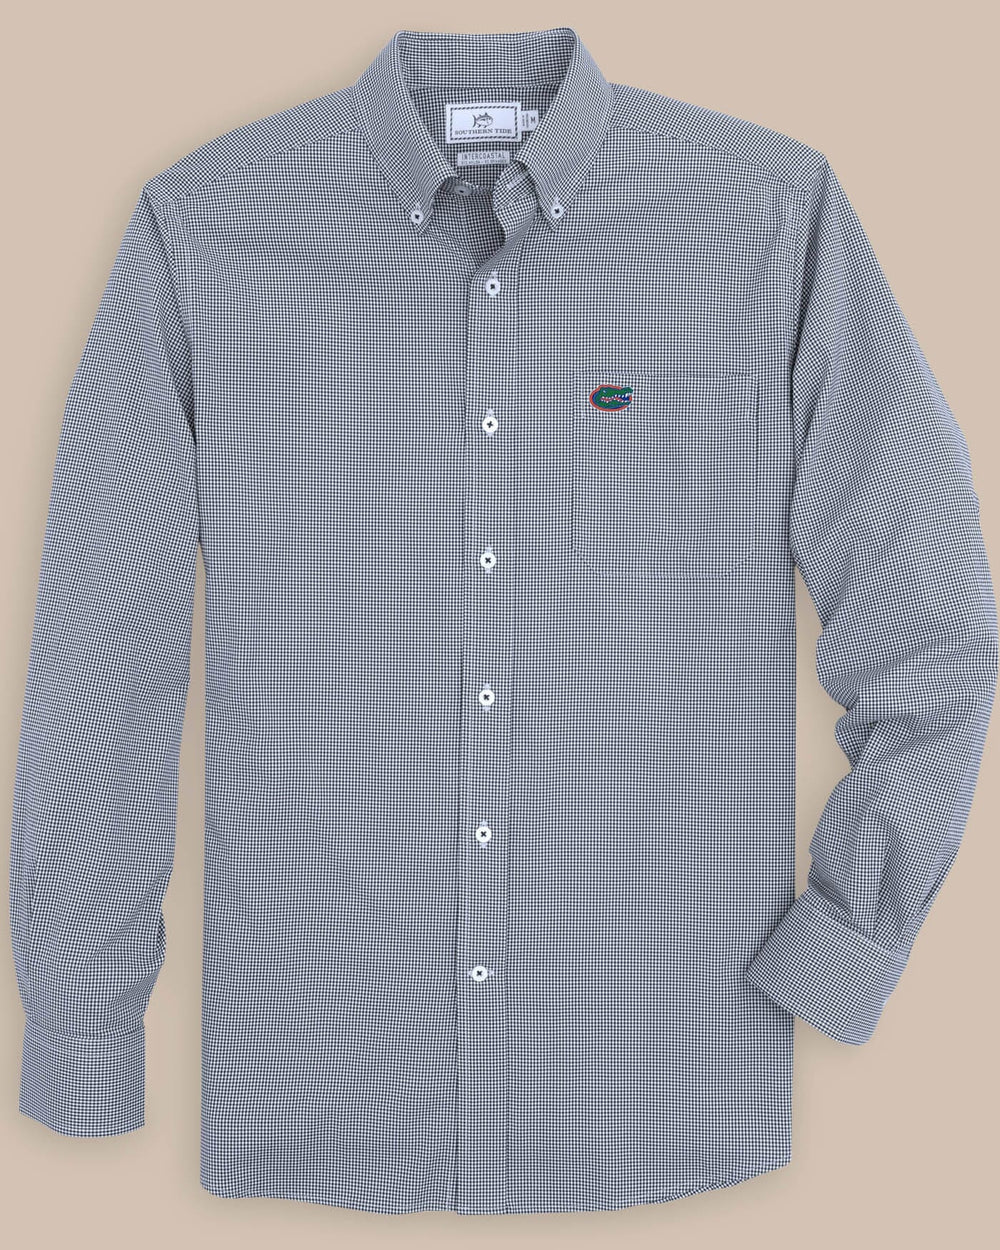 The front view of the Florida Gators Gingham Button Down Shirt by Southern Tide - Navy